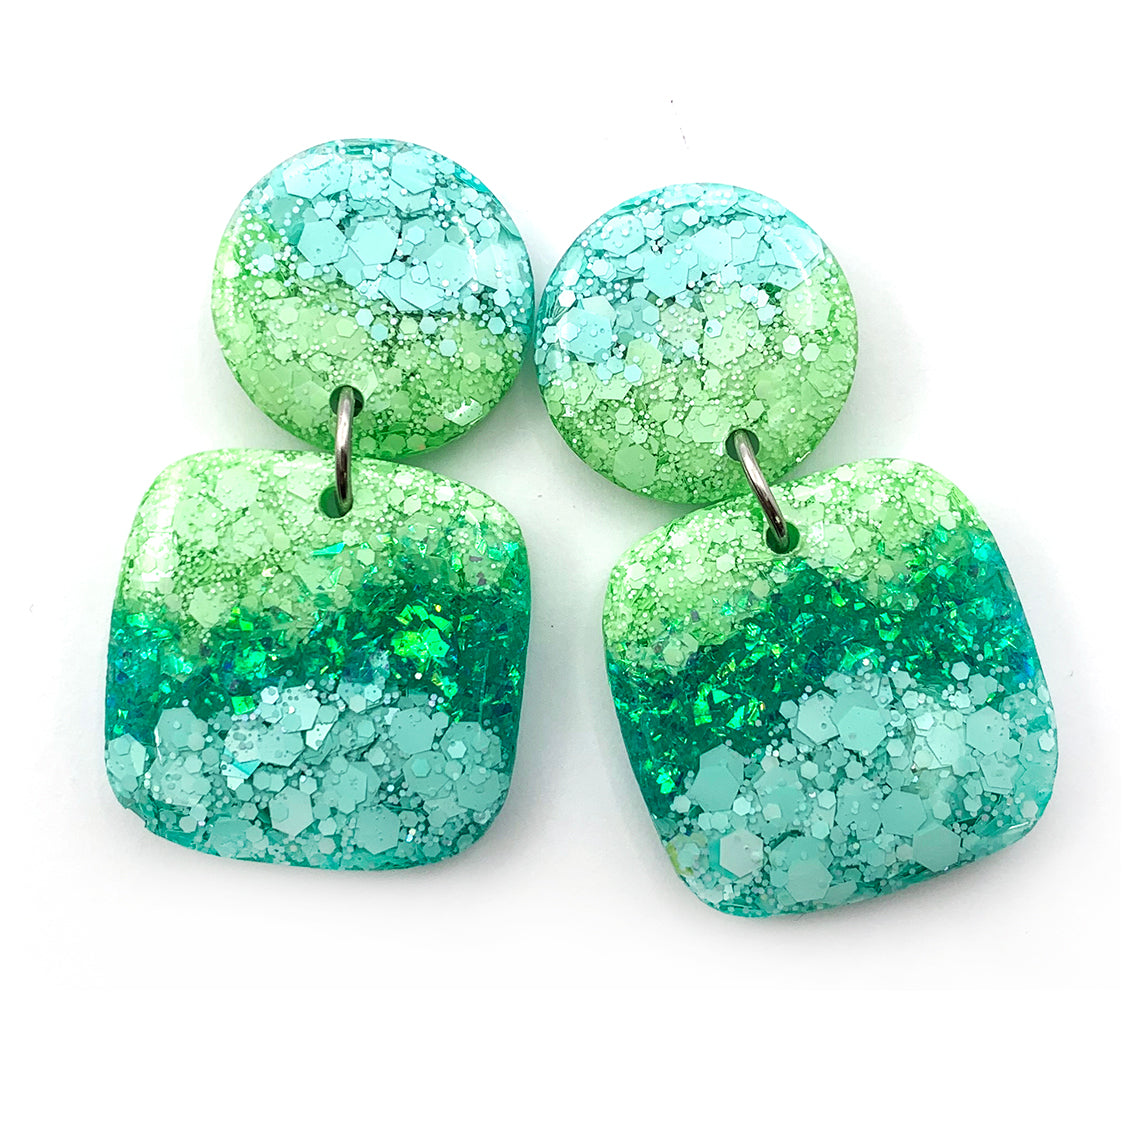 Resin Earring · Not Quite Square · Ombre